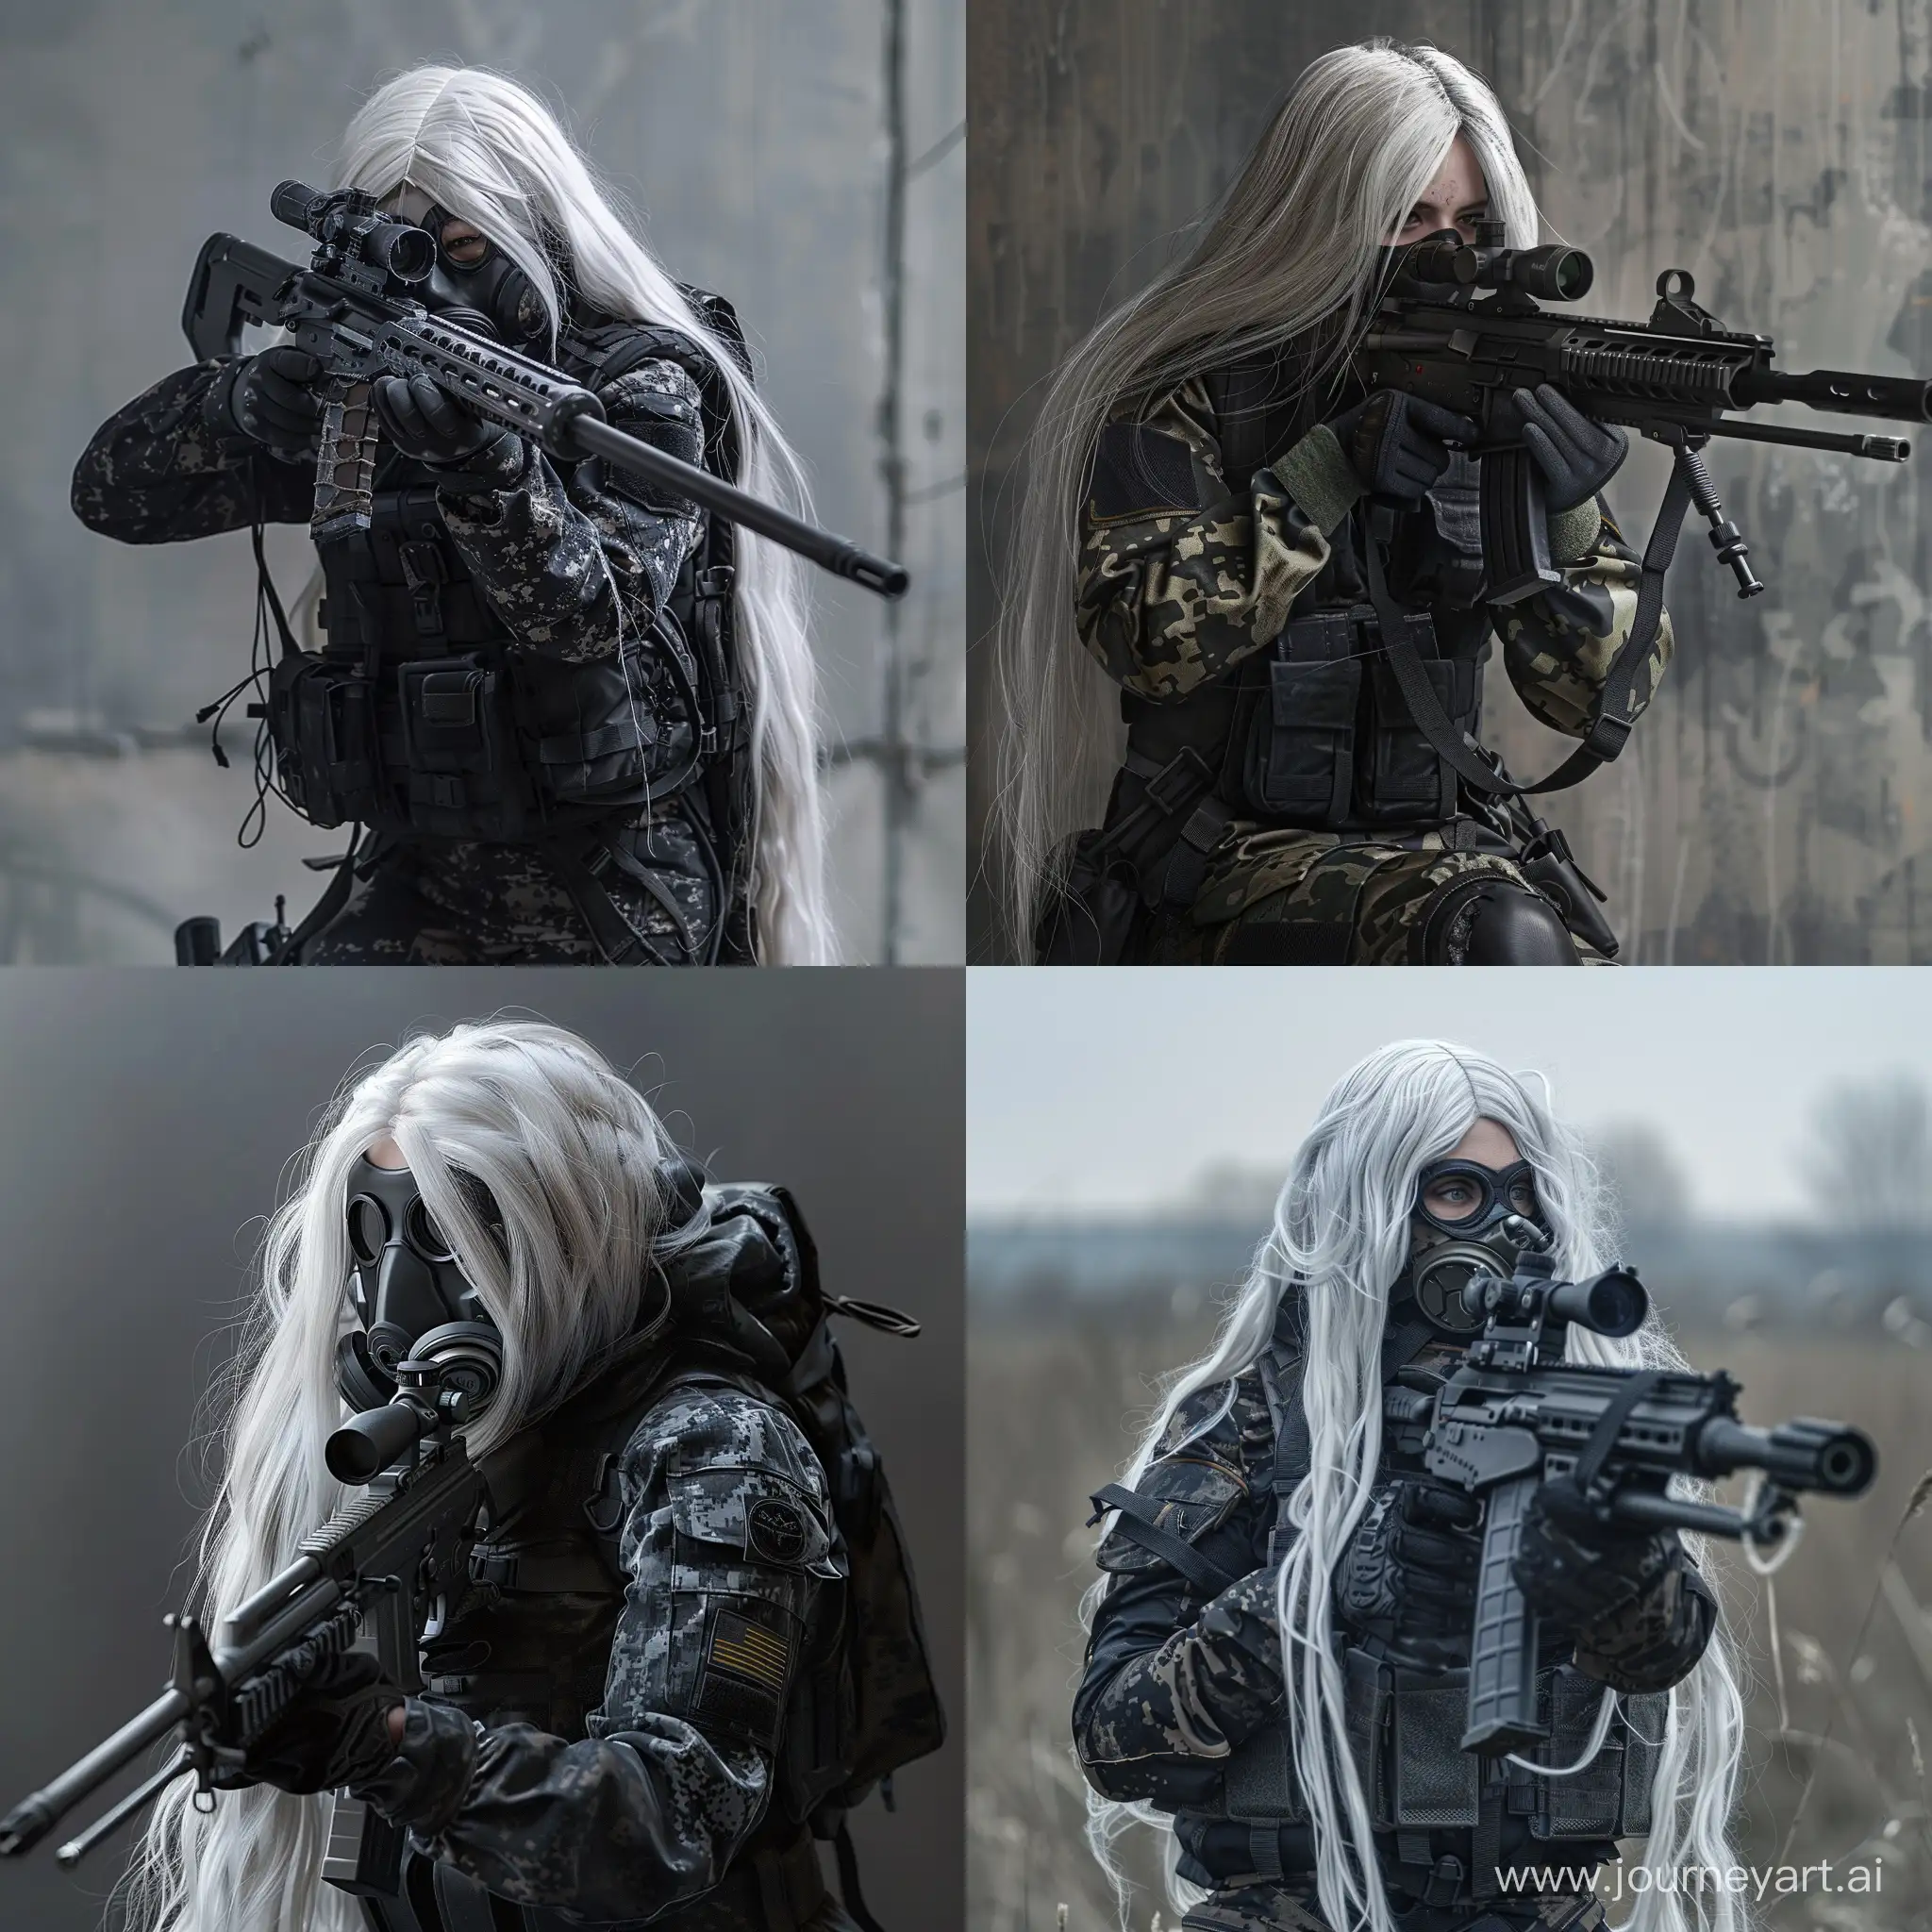 STALKER-Duty-Female-Sniper-with-Long-White-Hair-in-Black-Camouflage-Gear